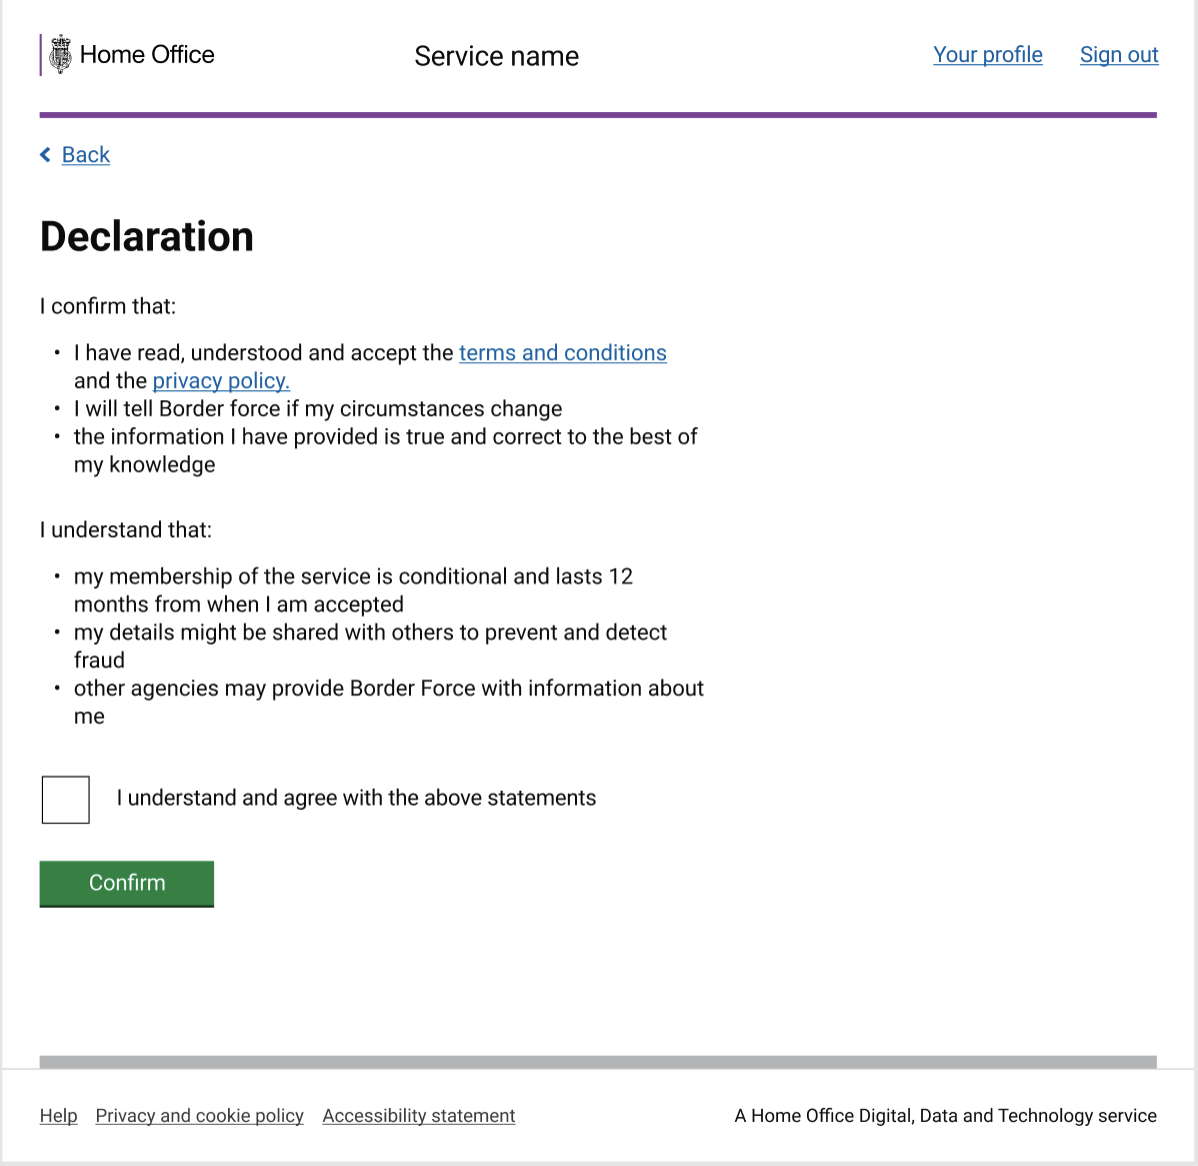 An example of how declarations are used in Home Office services